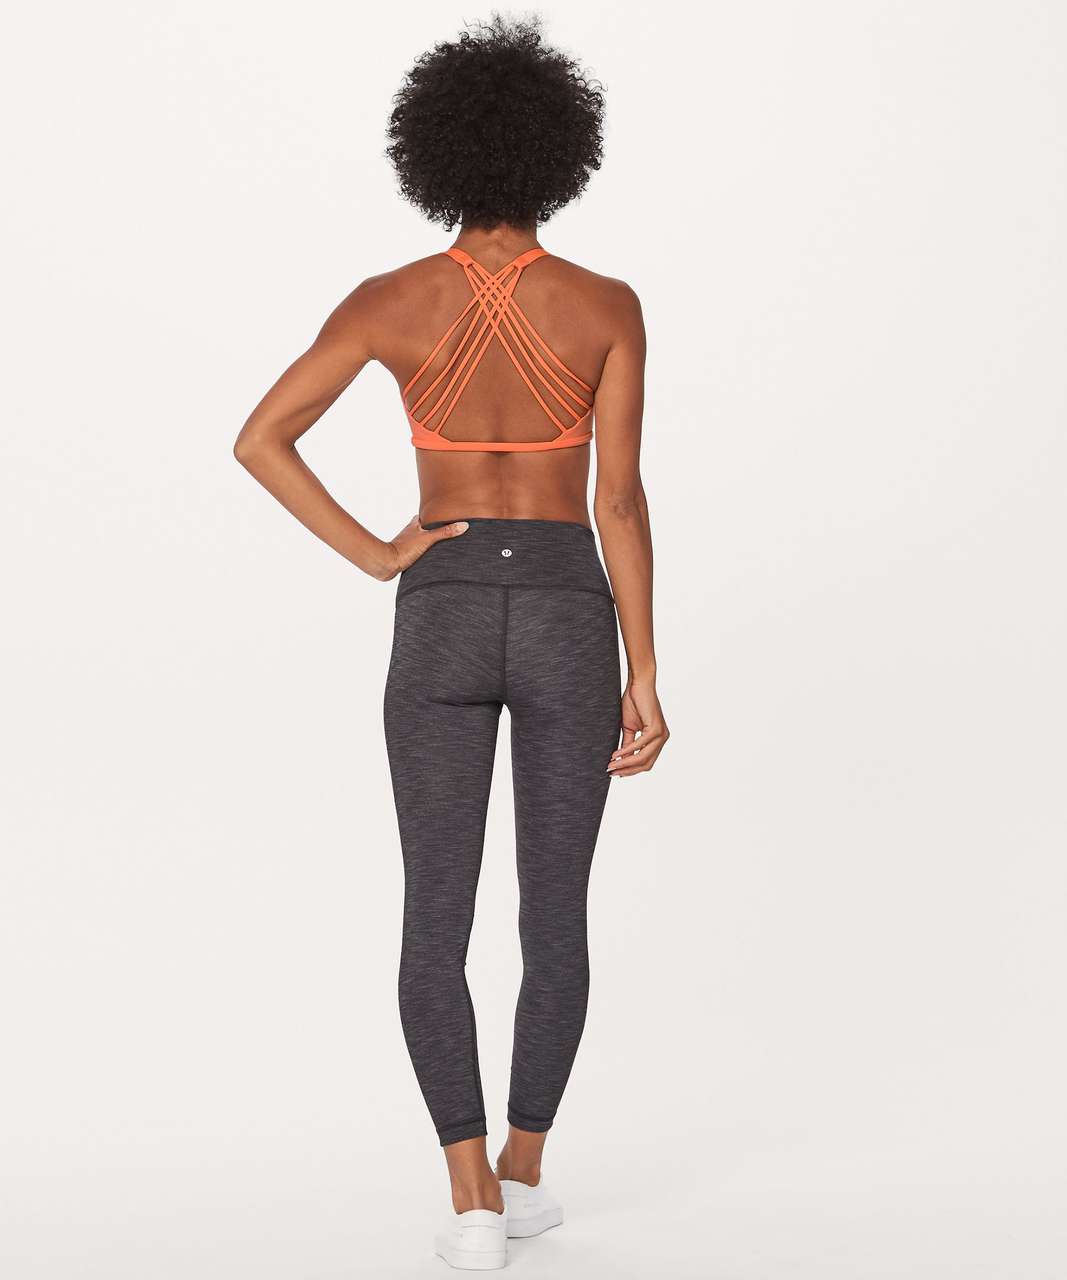 Lululemon Free to Be Bra - Wild *Light Support, A/B Cup - Filtered Orange